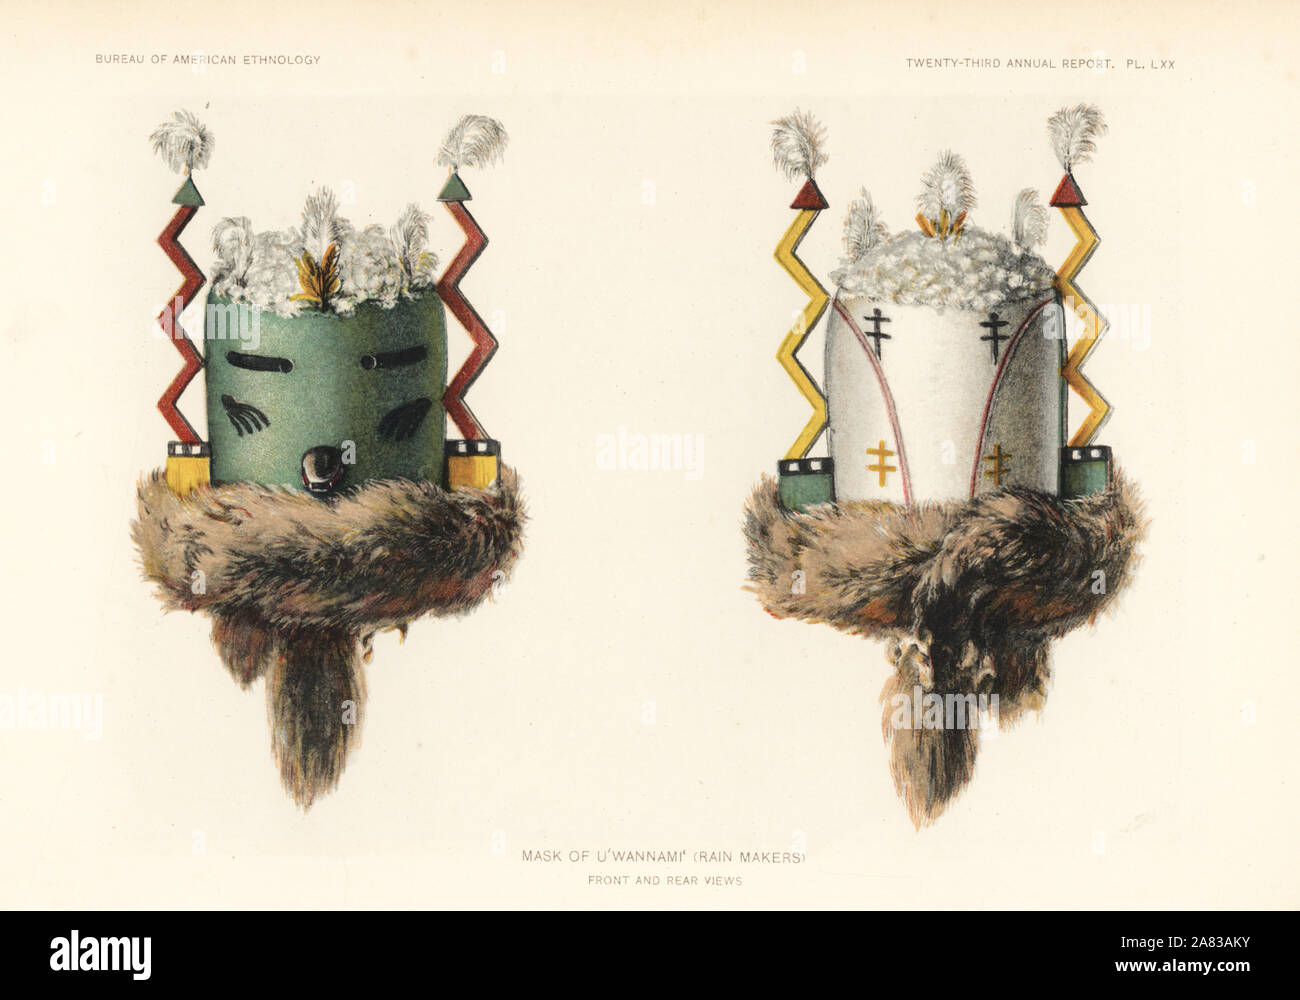 Mask of the U'wannami', Rain Makers, Zuni Nation. Chromolithograph by August Hoen from John Wesley Powell's 23rd Annual Report of the Bureau of American Ethnology, Washington, 1904. Stock Photo